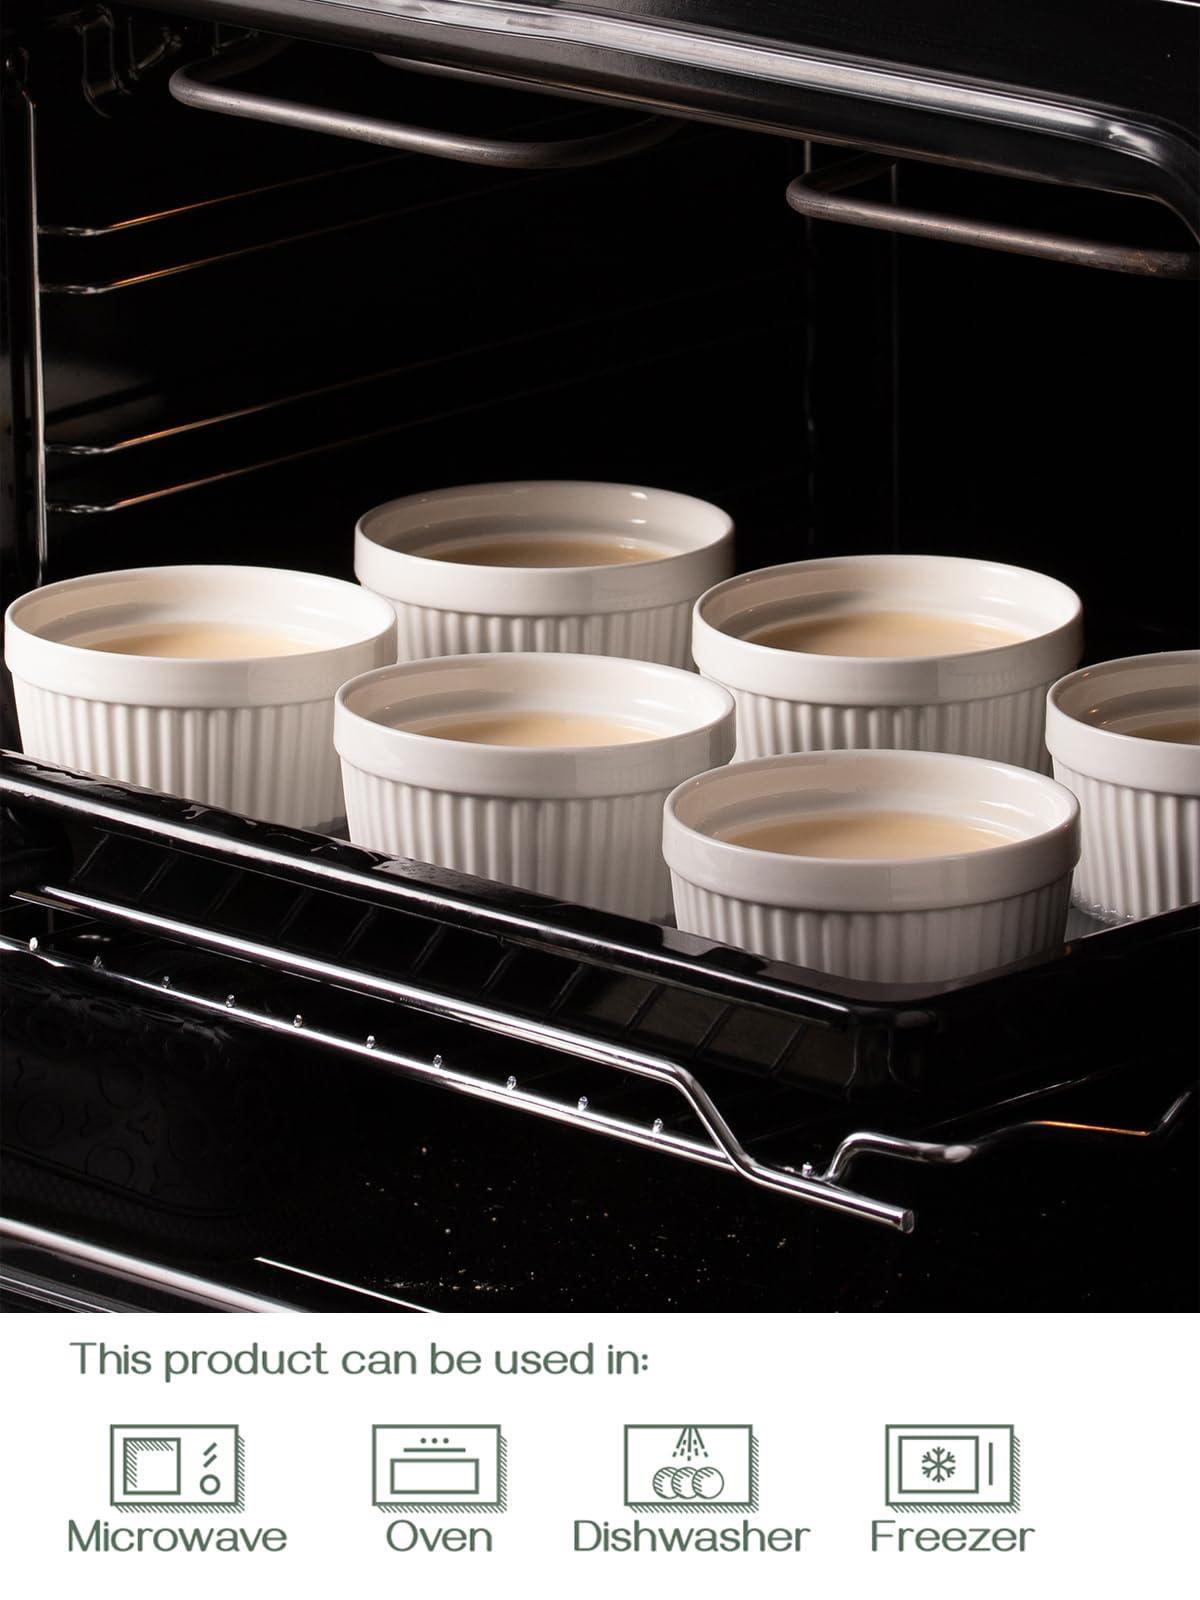 DOWAN Ramekins 8 oz Oven Safe with Lids, Creme brulee Ramekins Bowls with Covers, Porcelain White Ramekins Souffle Dishes for Baking, Stackable, Set of 6 - CookCave